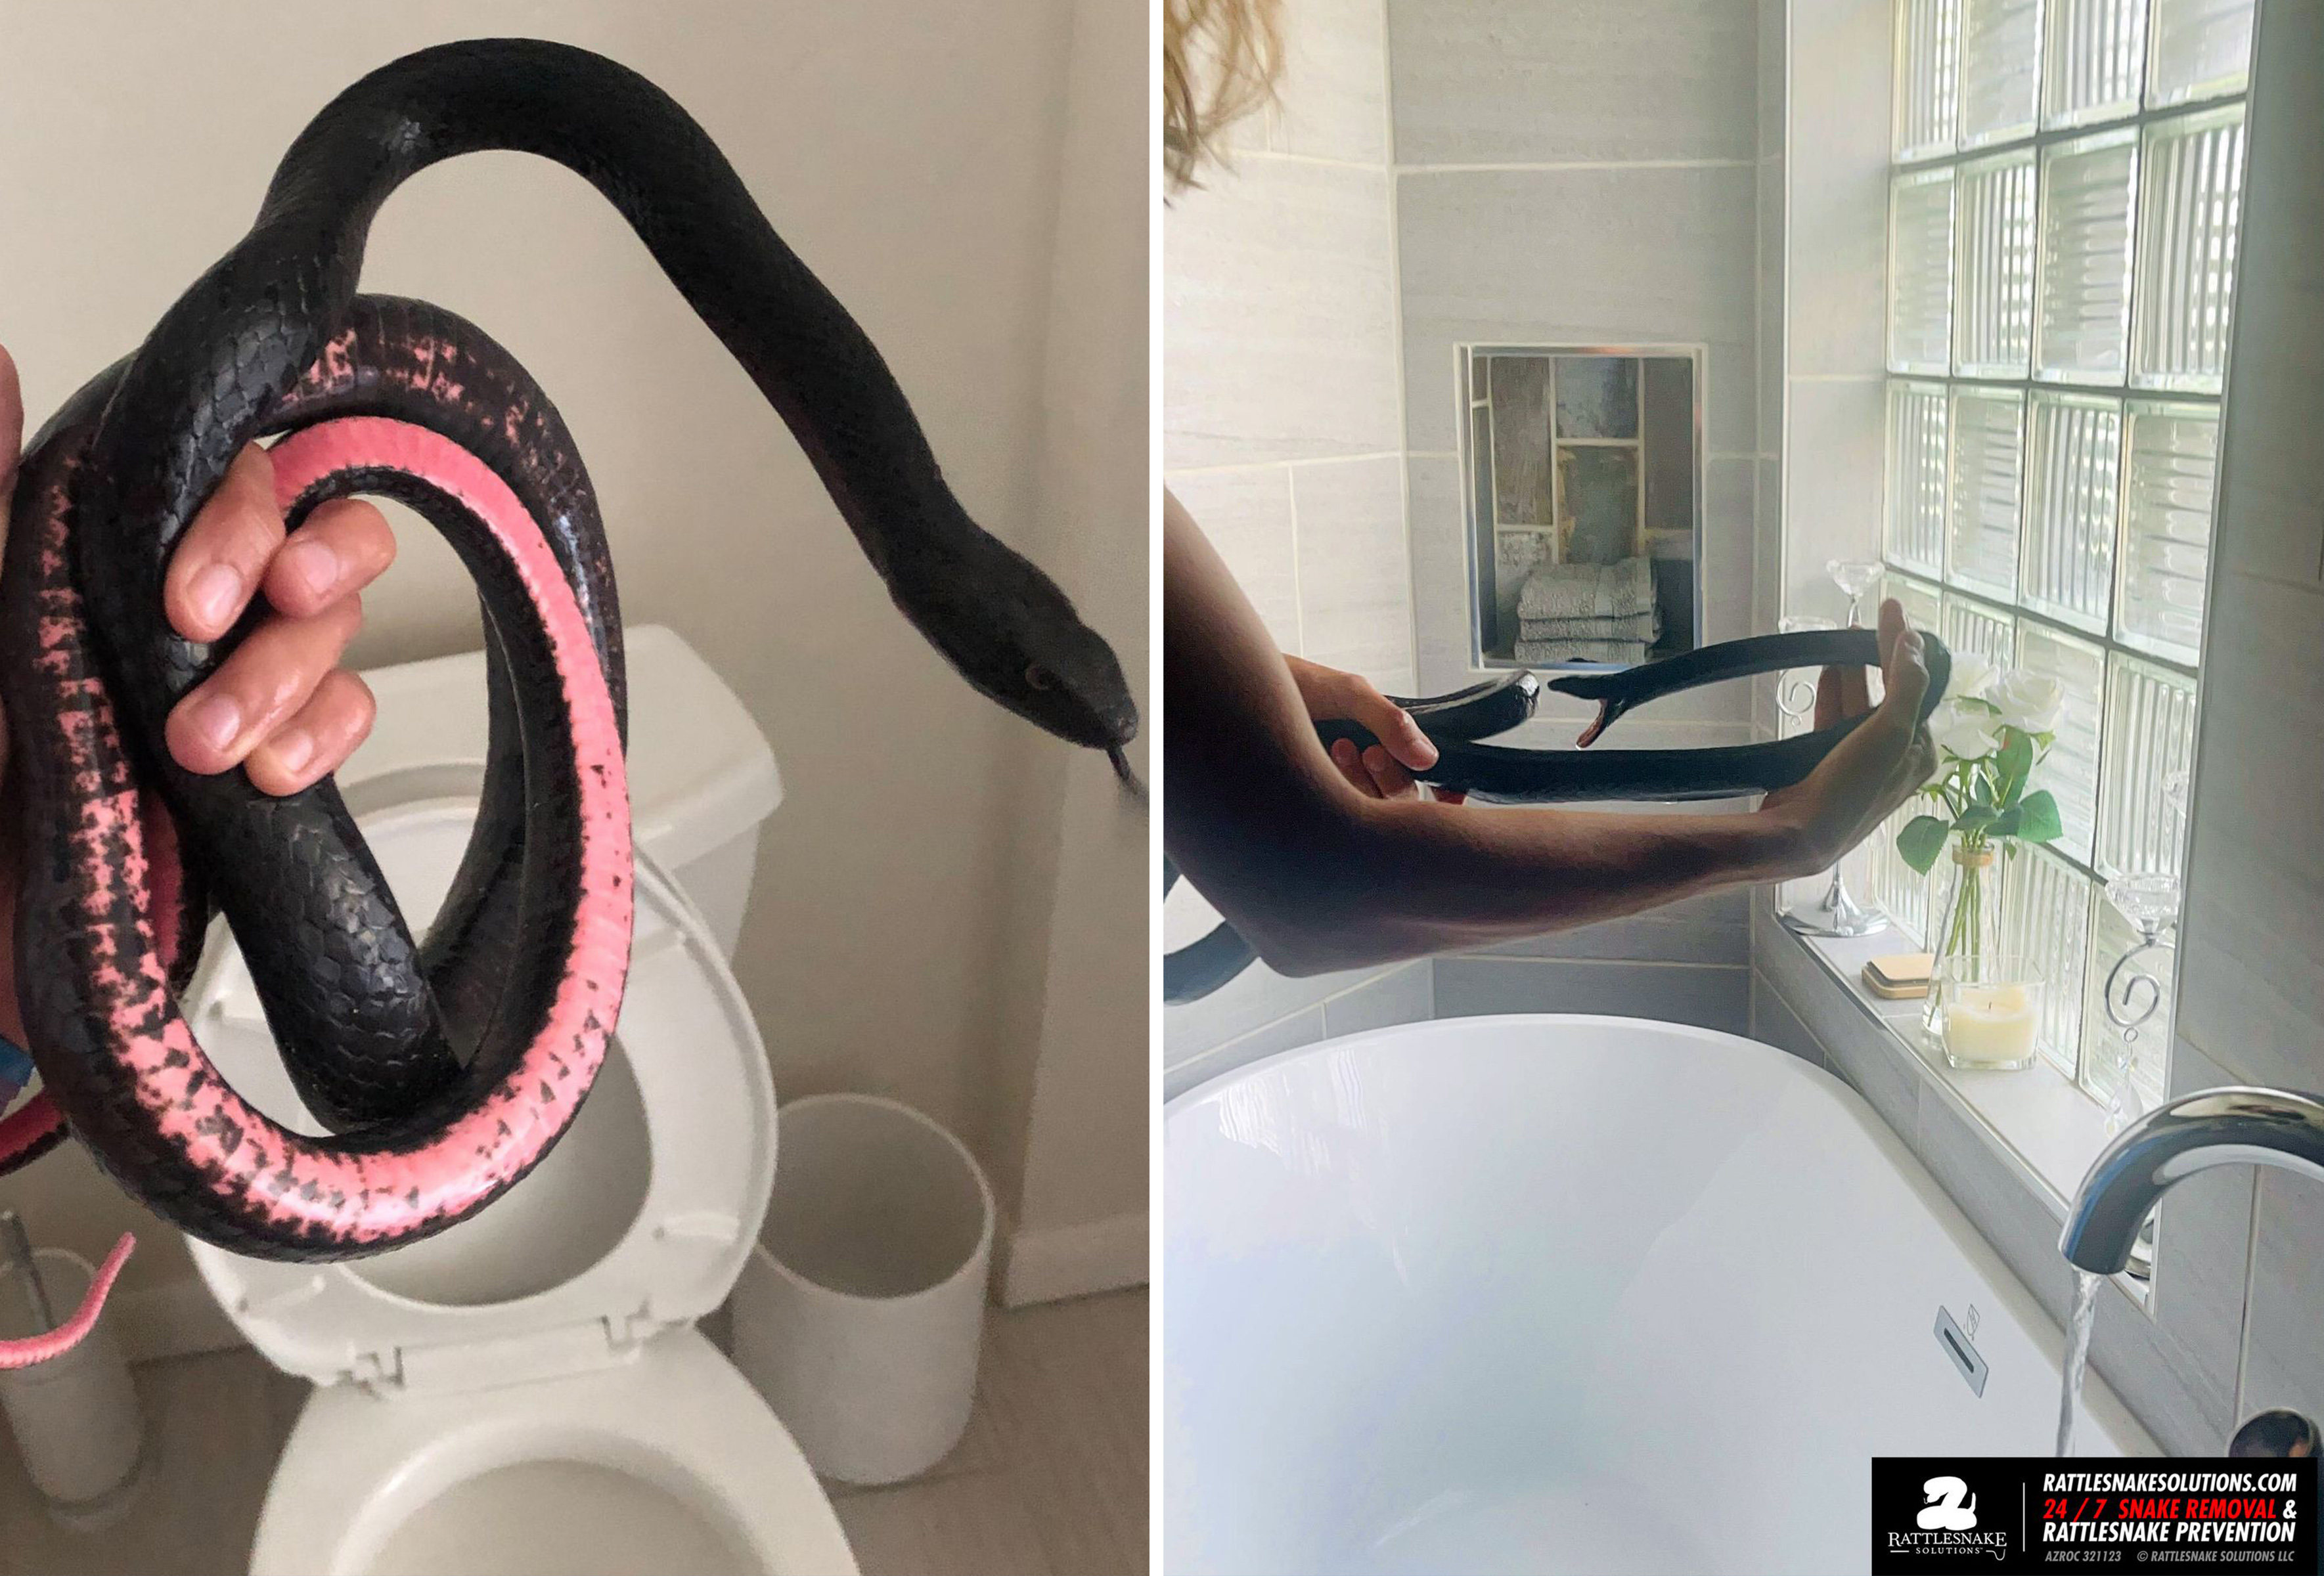 Can Snakes Get in Your Toilet From the Drain?